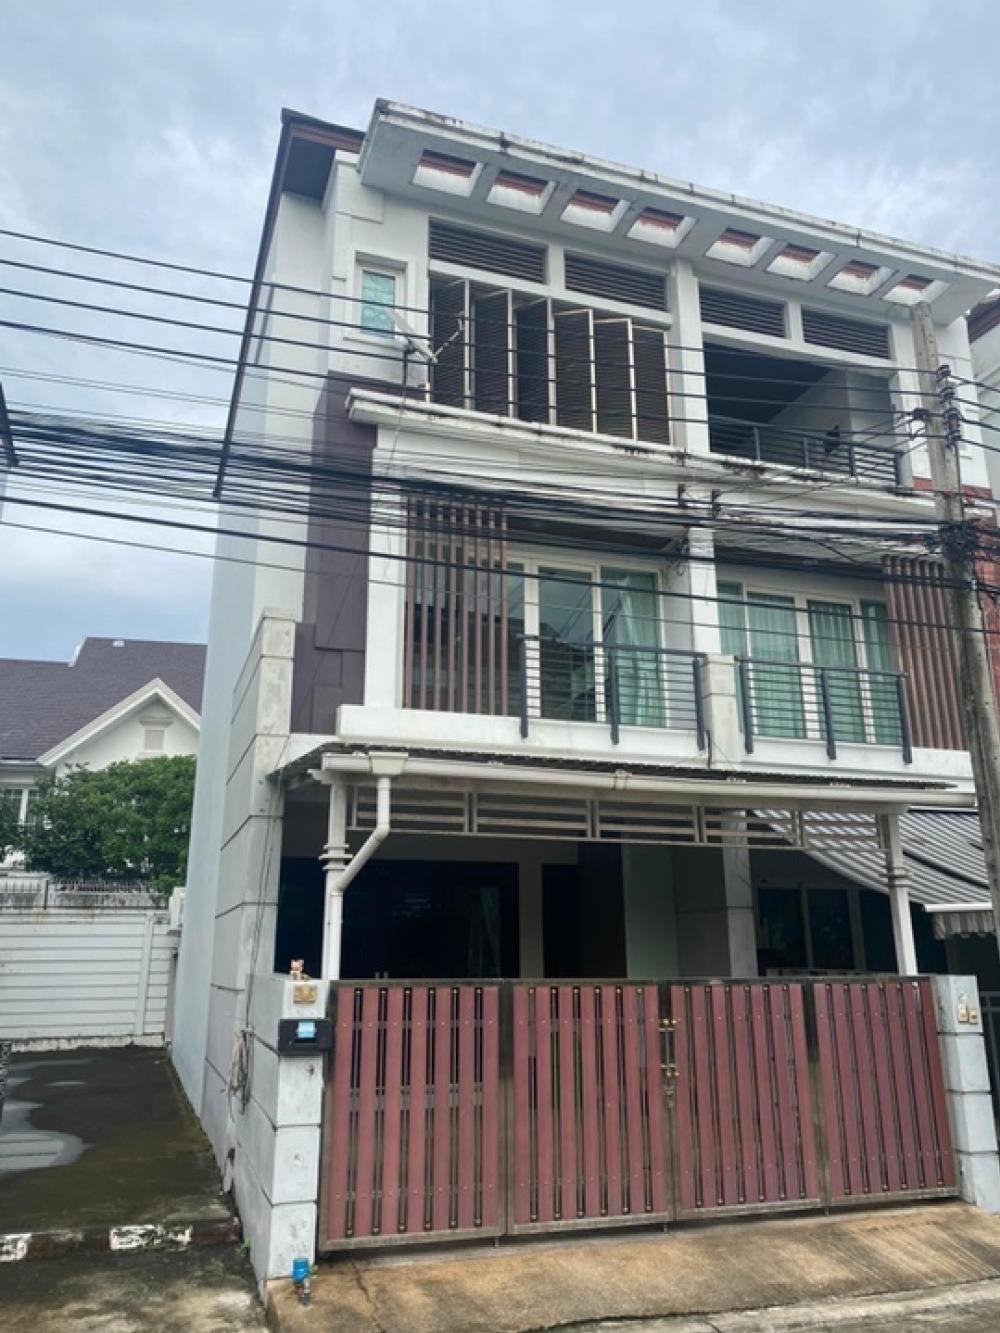 For RentTownhouseYothinpattana,CDC : 🏡LK208 townhome for rent 3-storey t , Baan Klang Muang project. Urbanion Rama 9-Ladprao, 3 bedroom, 3 bathroom, built-in luxury with bathtub, near Town in Town - only 32,000/month